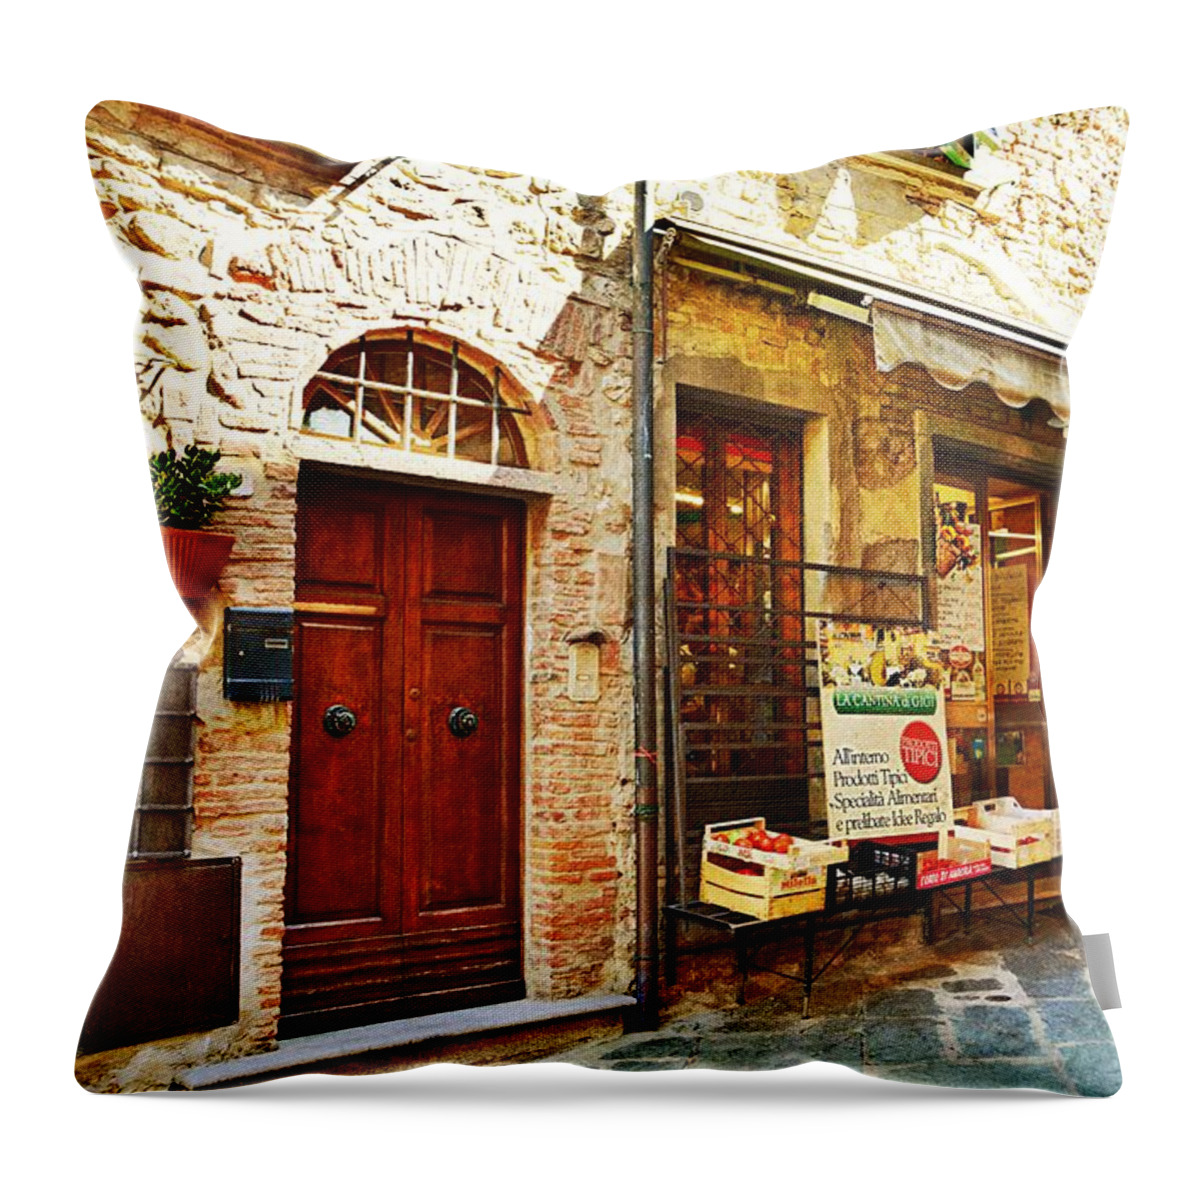 Small Shop Throw Pillow featuring the photograph Typical small shop in Tuscany by Ramona Matei